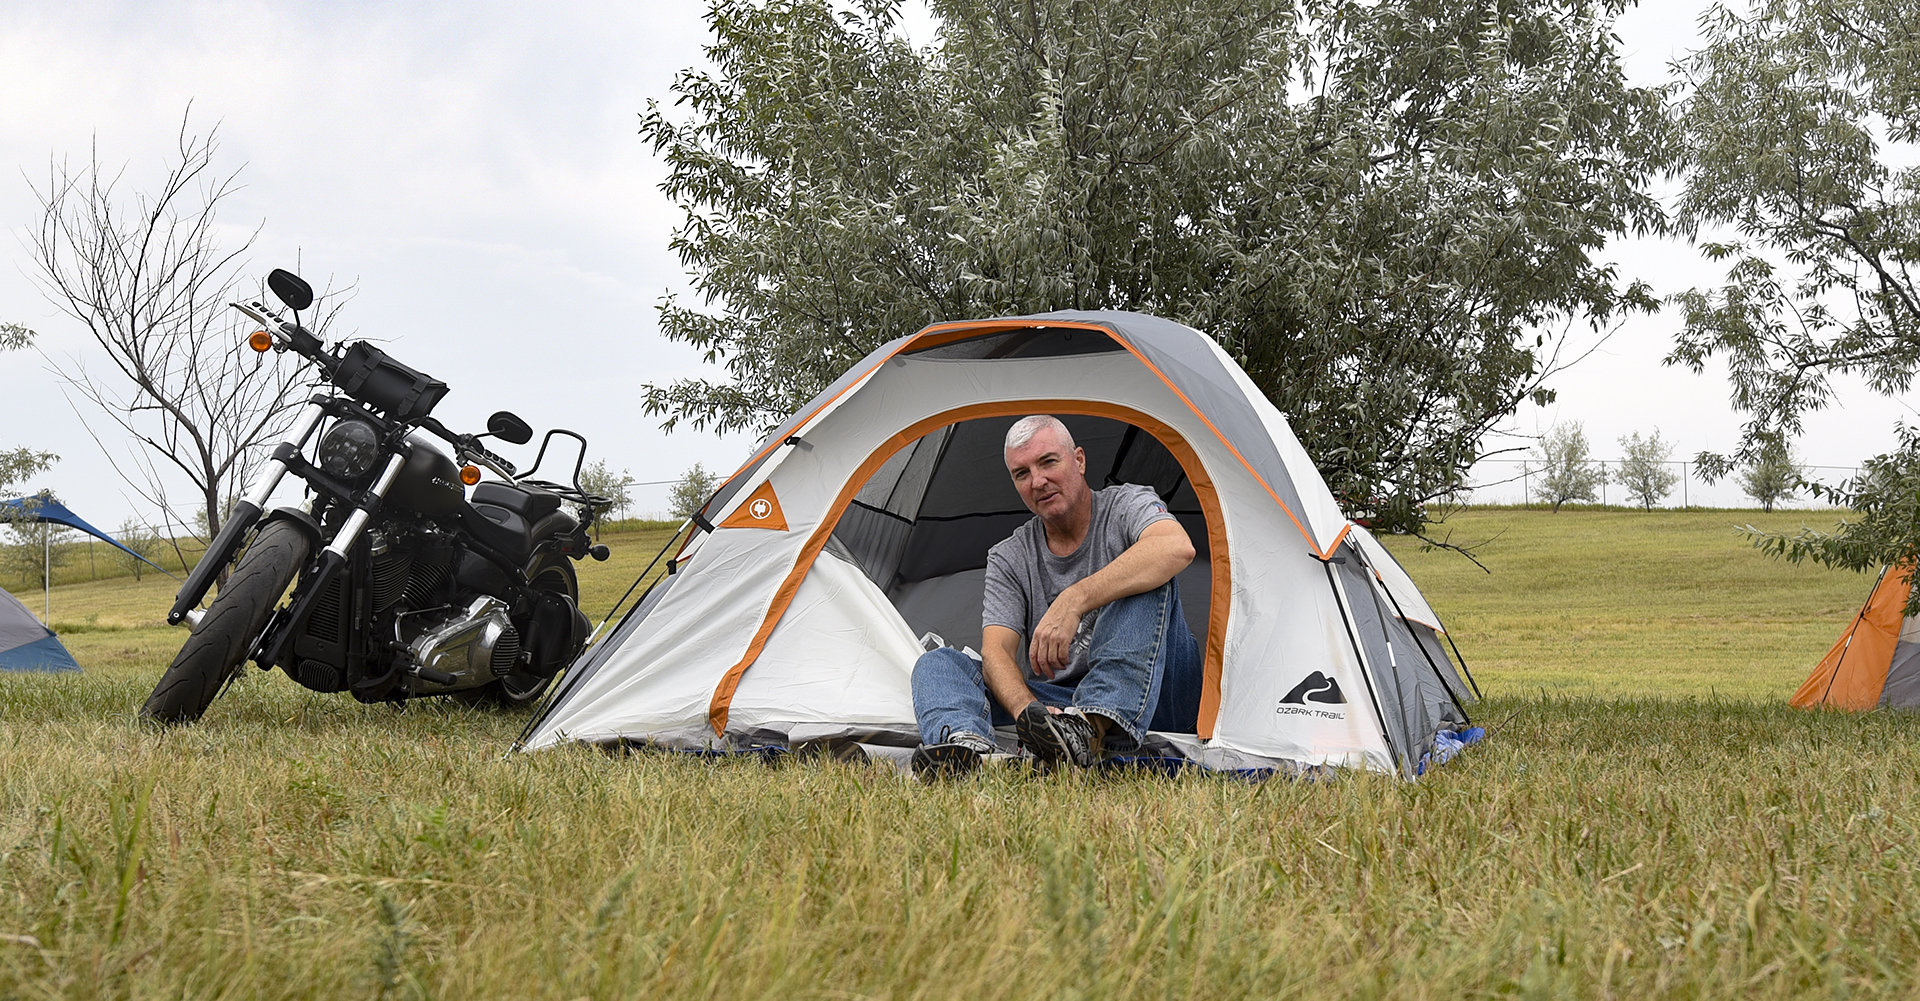 Motorcycle Camping Gear: 10 Pieces of Essential Gear You Shouldn’t Leave Home Without